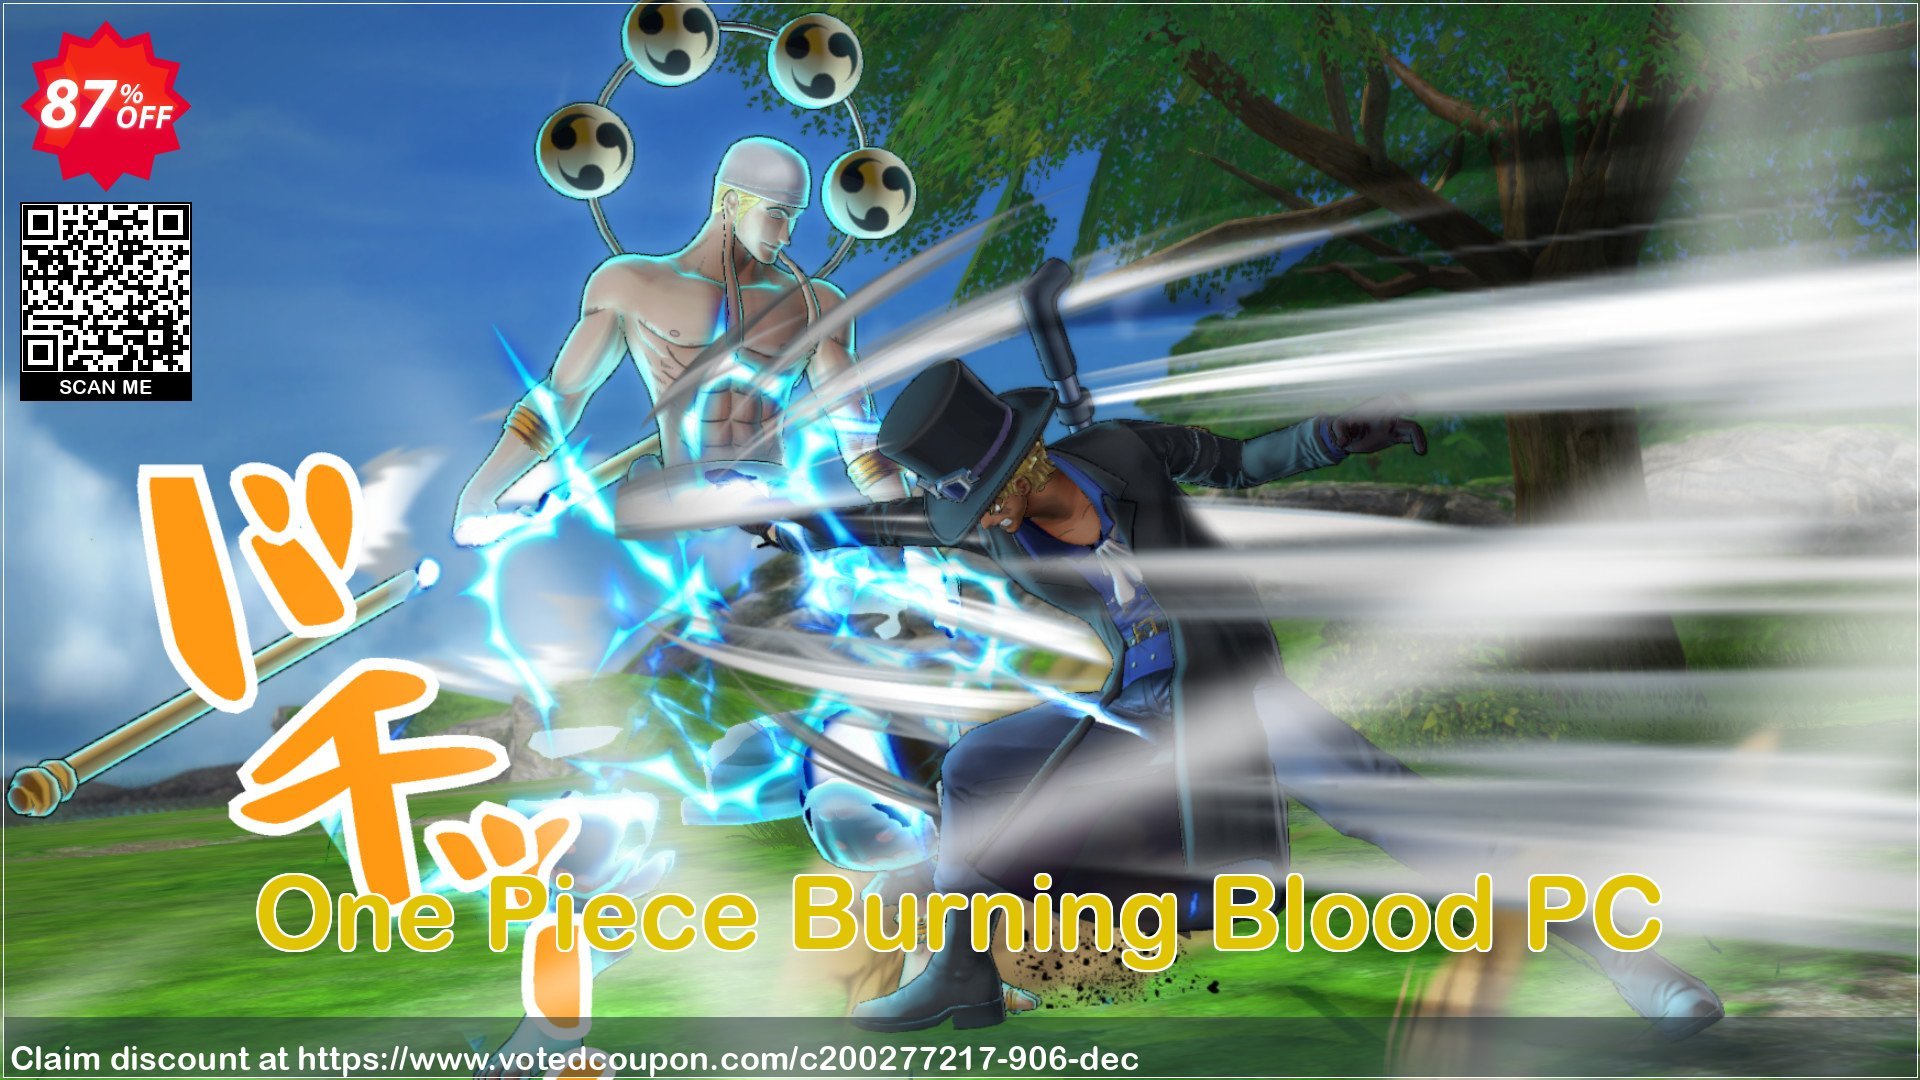 One Piece Burning Blood PC Coupon Code Apr 2024, 87% OFF - VotedCoupon